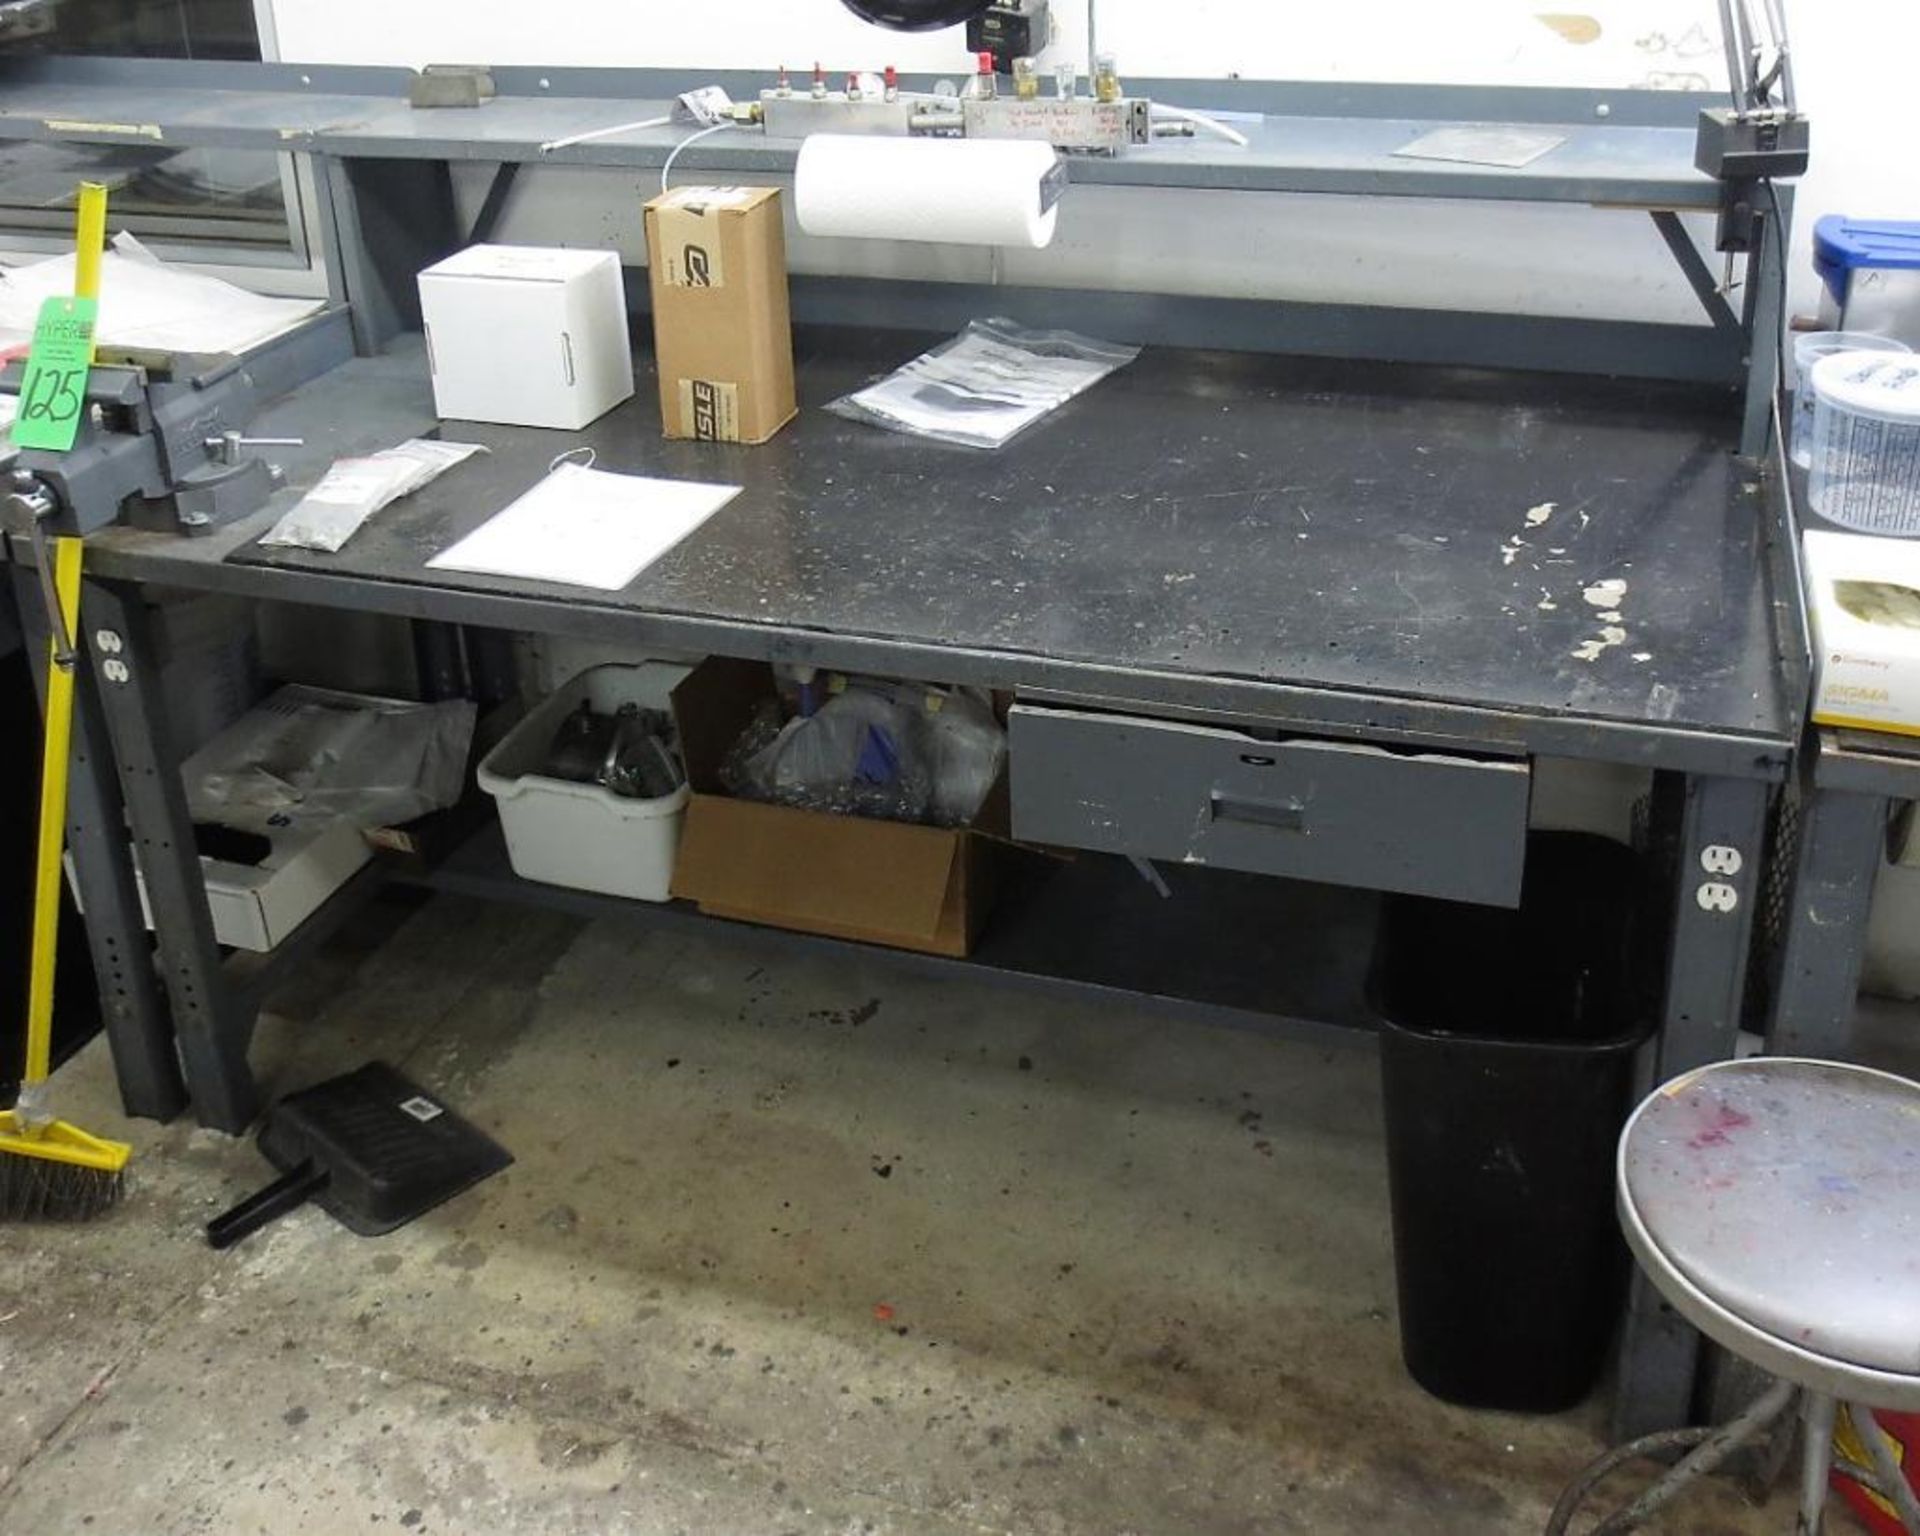 3' X 6' Work Bench with Rock River 6" Bench Vise ( Loc. On Mezzanine buyer responsible for load out)